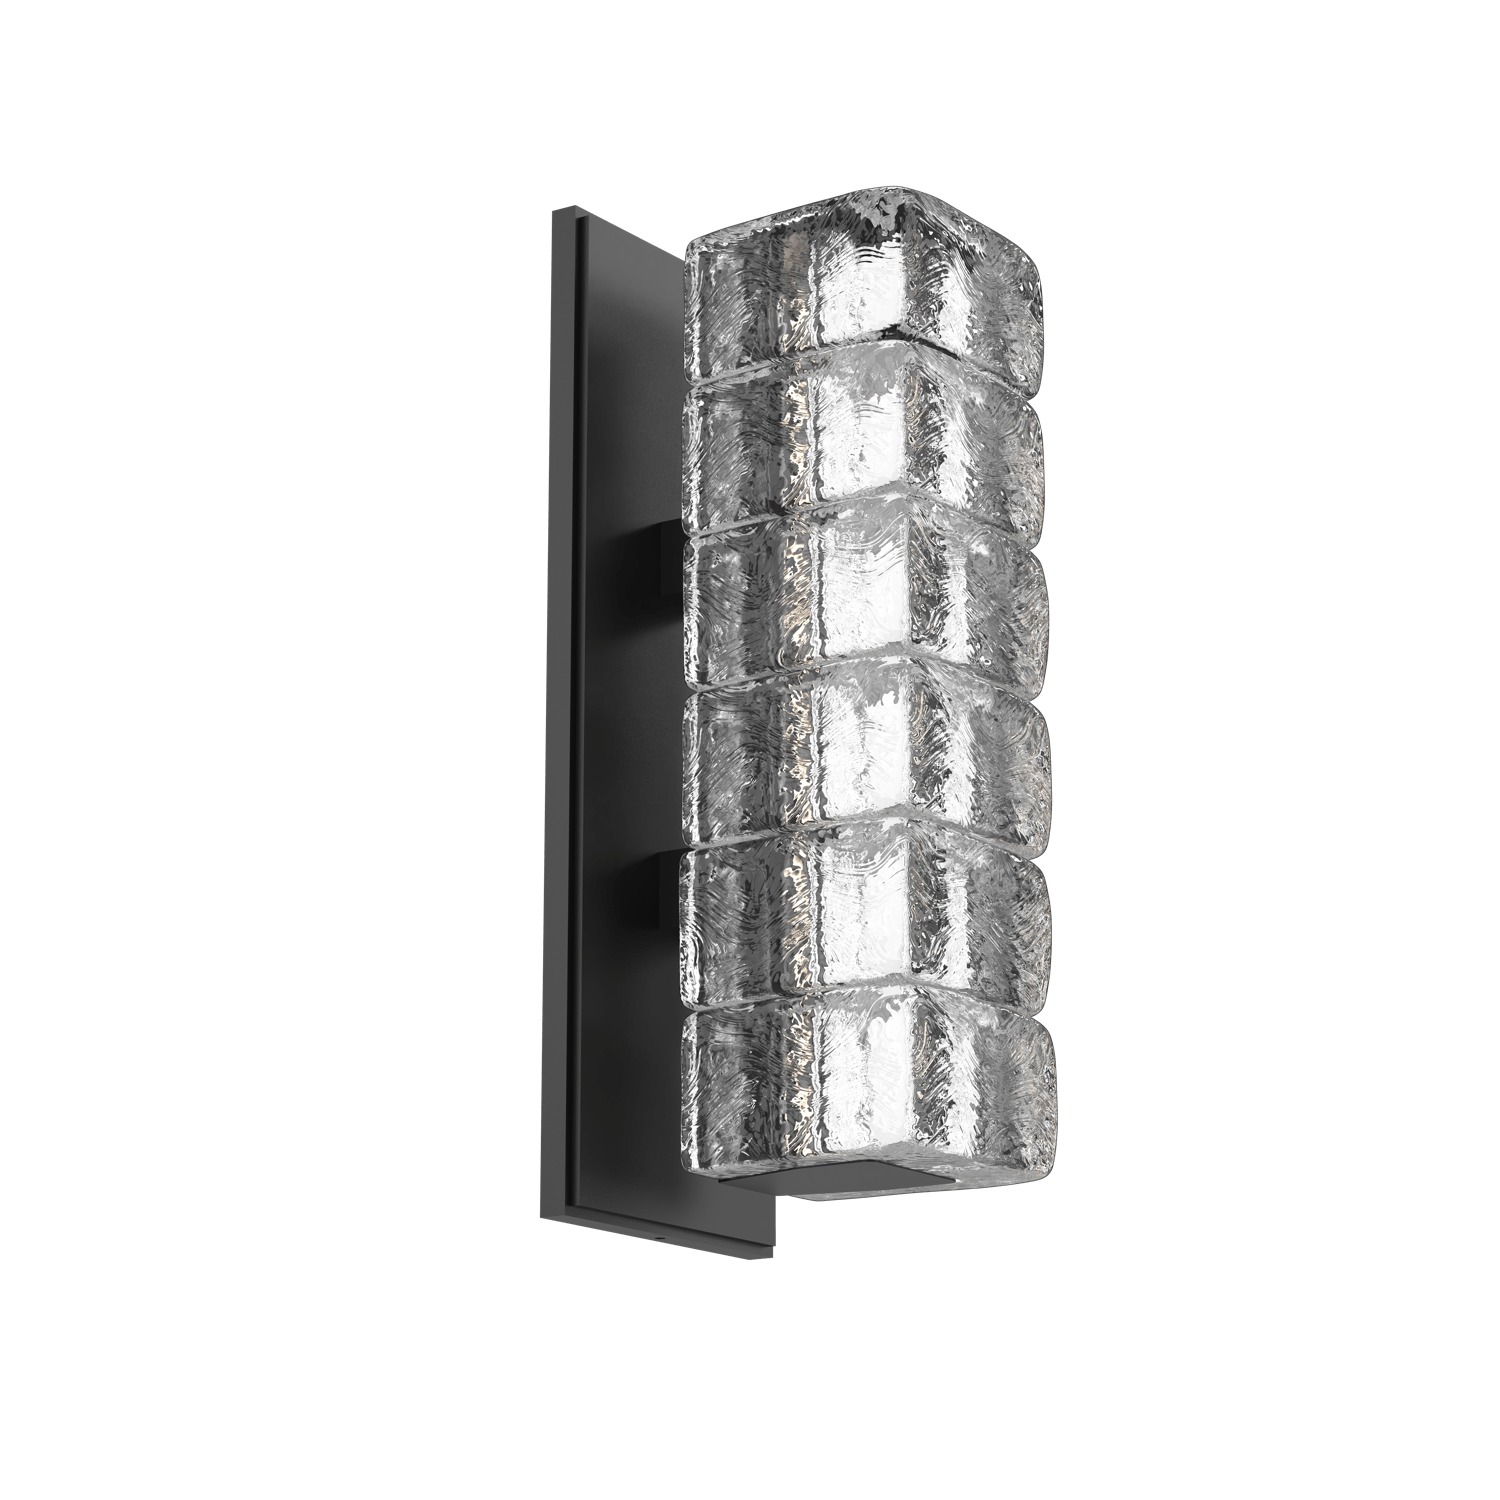 IDB0080-01-MB-Hammerton-Studio-Asscher-wall-sconce-with-matte-black-finish-and-clear-cast-glass-shades-and-LED-lamping